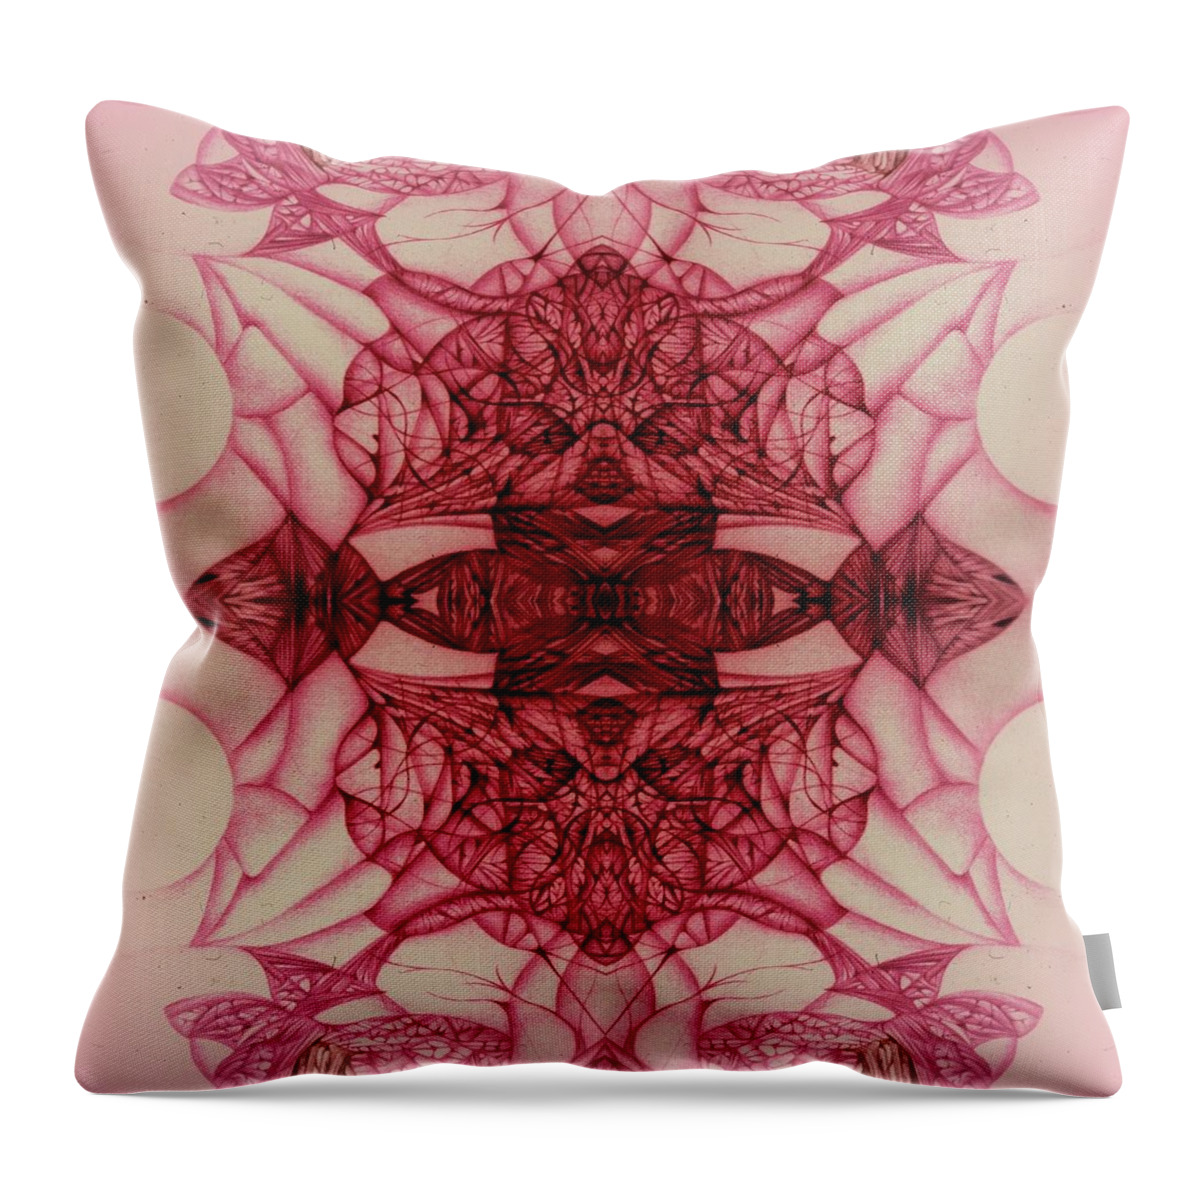 Digitally Altered Ballpoint Drawings Throw Pillow featuring the digital art Digitized Ballpoint #6 by Jack Dillhunt